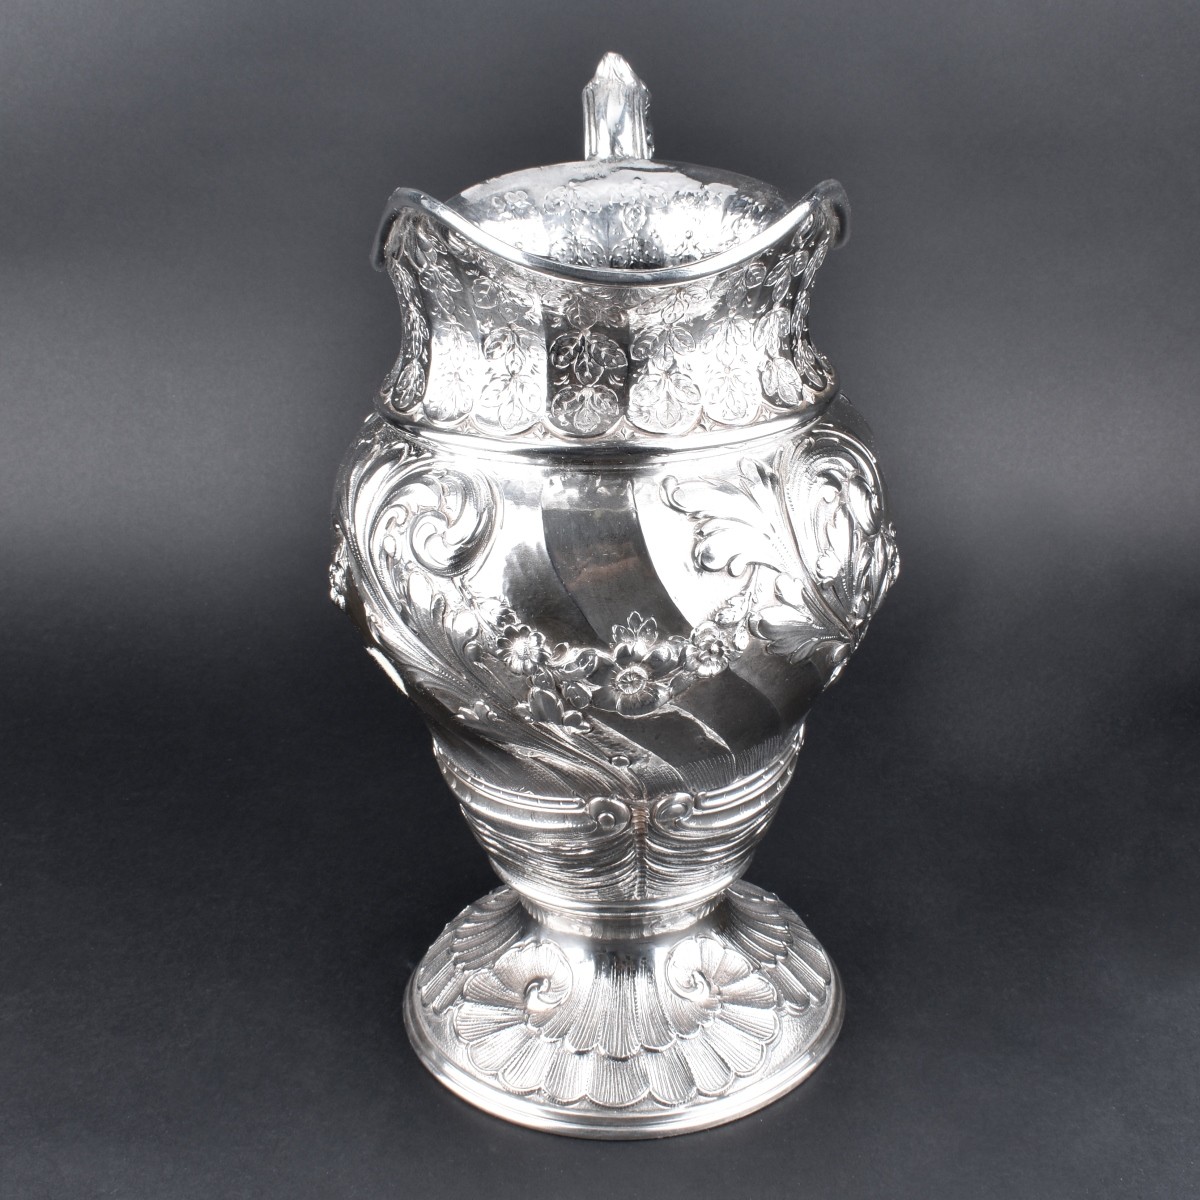 19/20th C. Repousse Silver Plate Water Pitcher